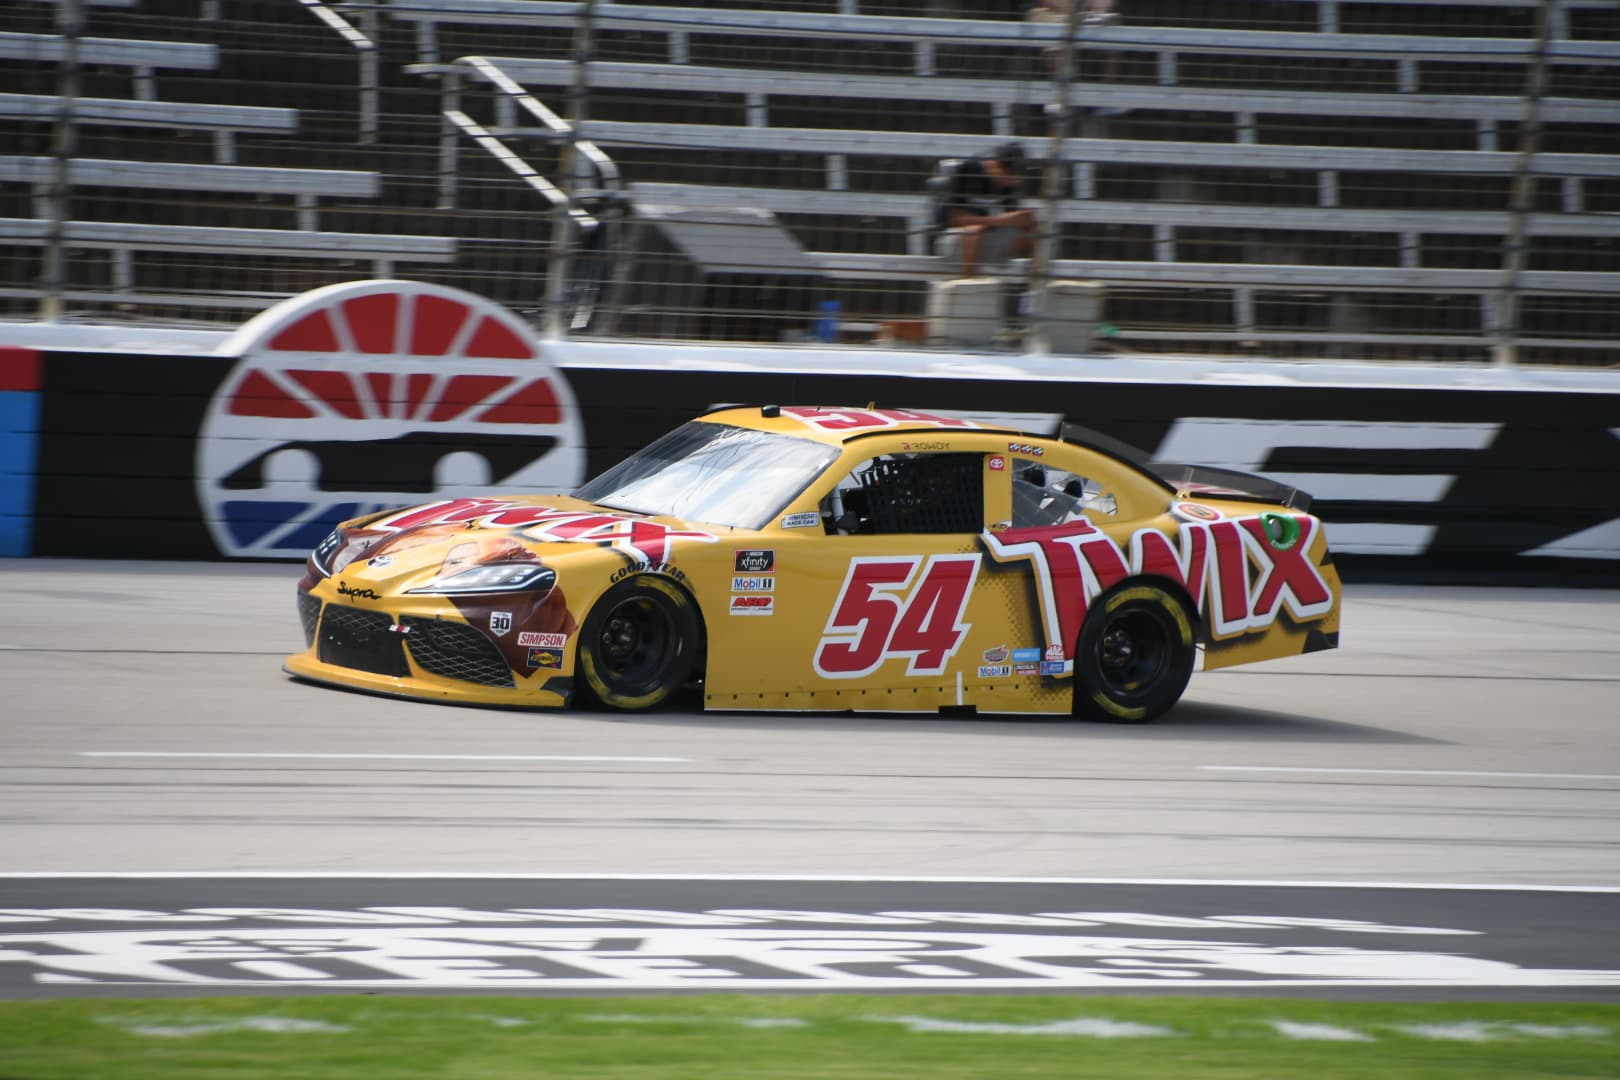 Of course, Kyle Busch enjoyed the powers of Twix's cookie crunch. (Photo: Sean Folsom/The Podium Finish)